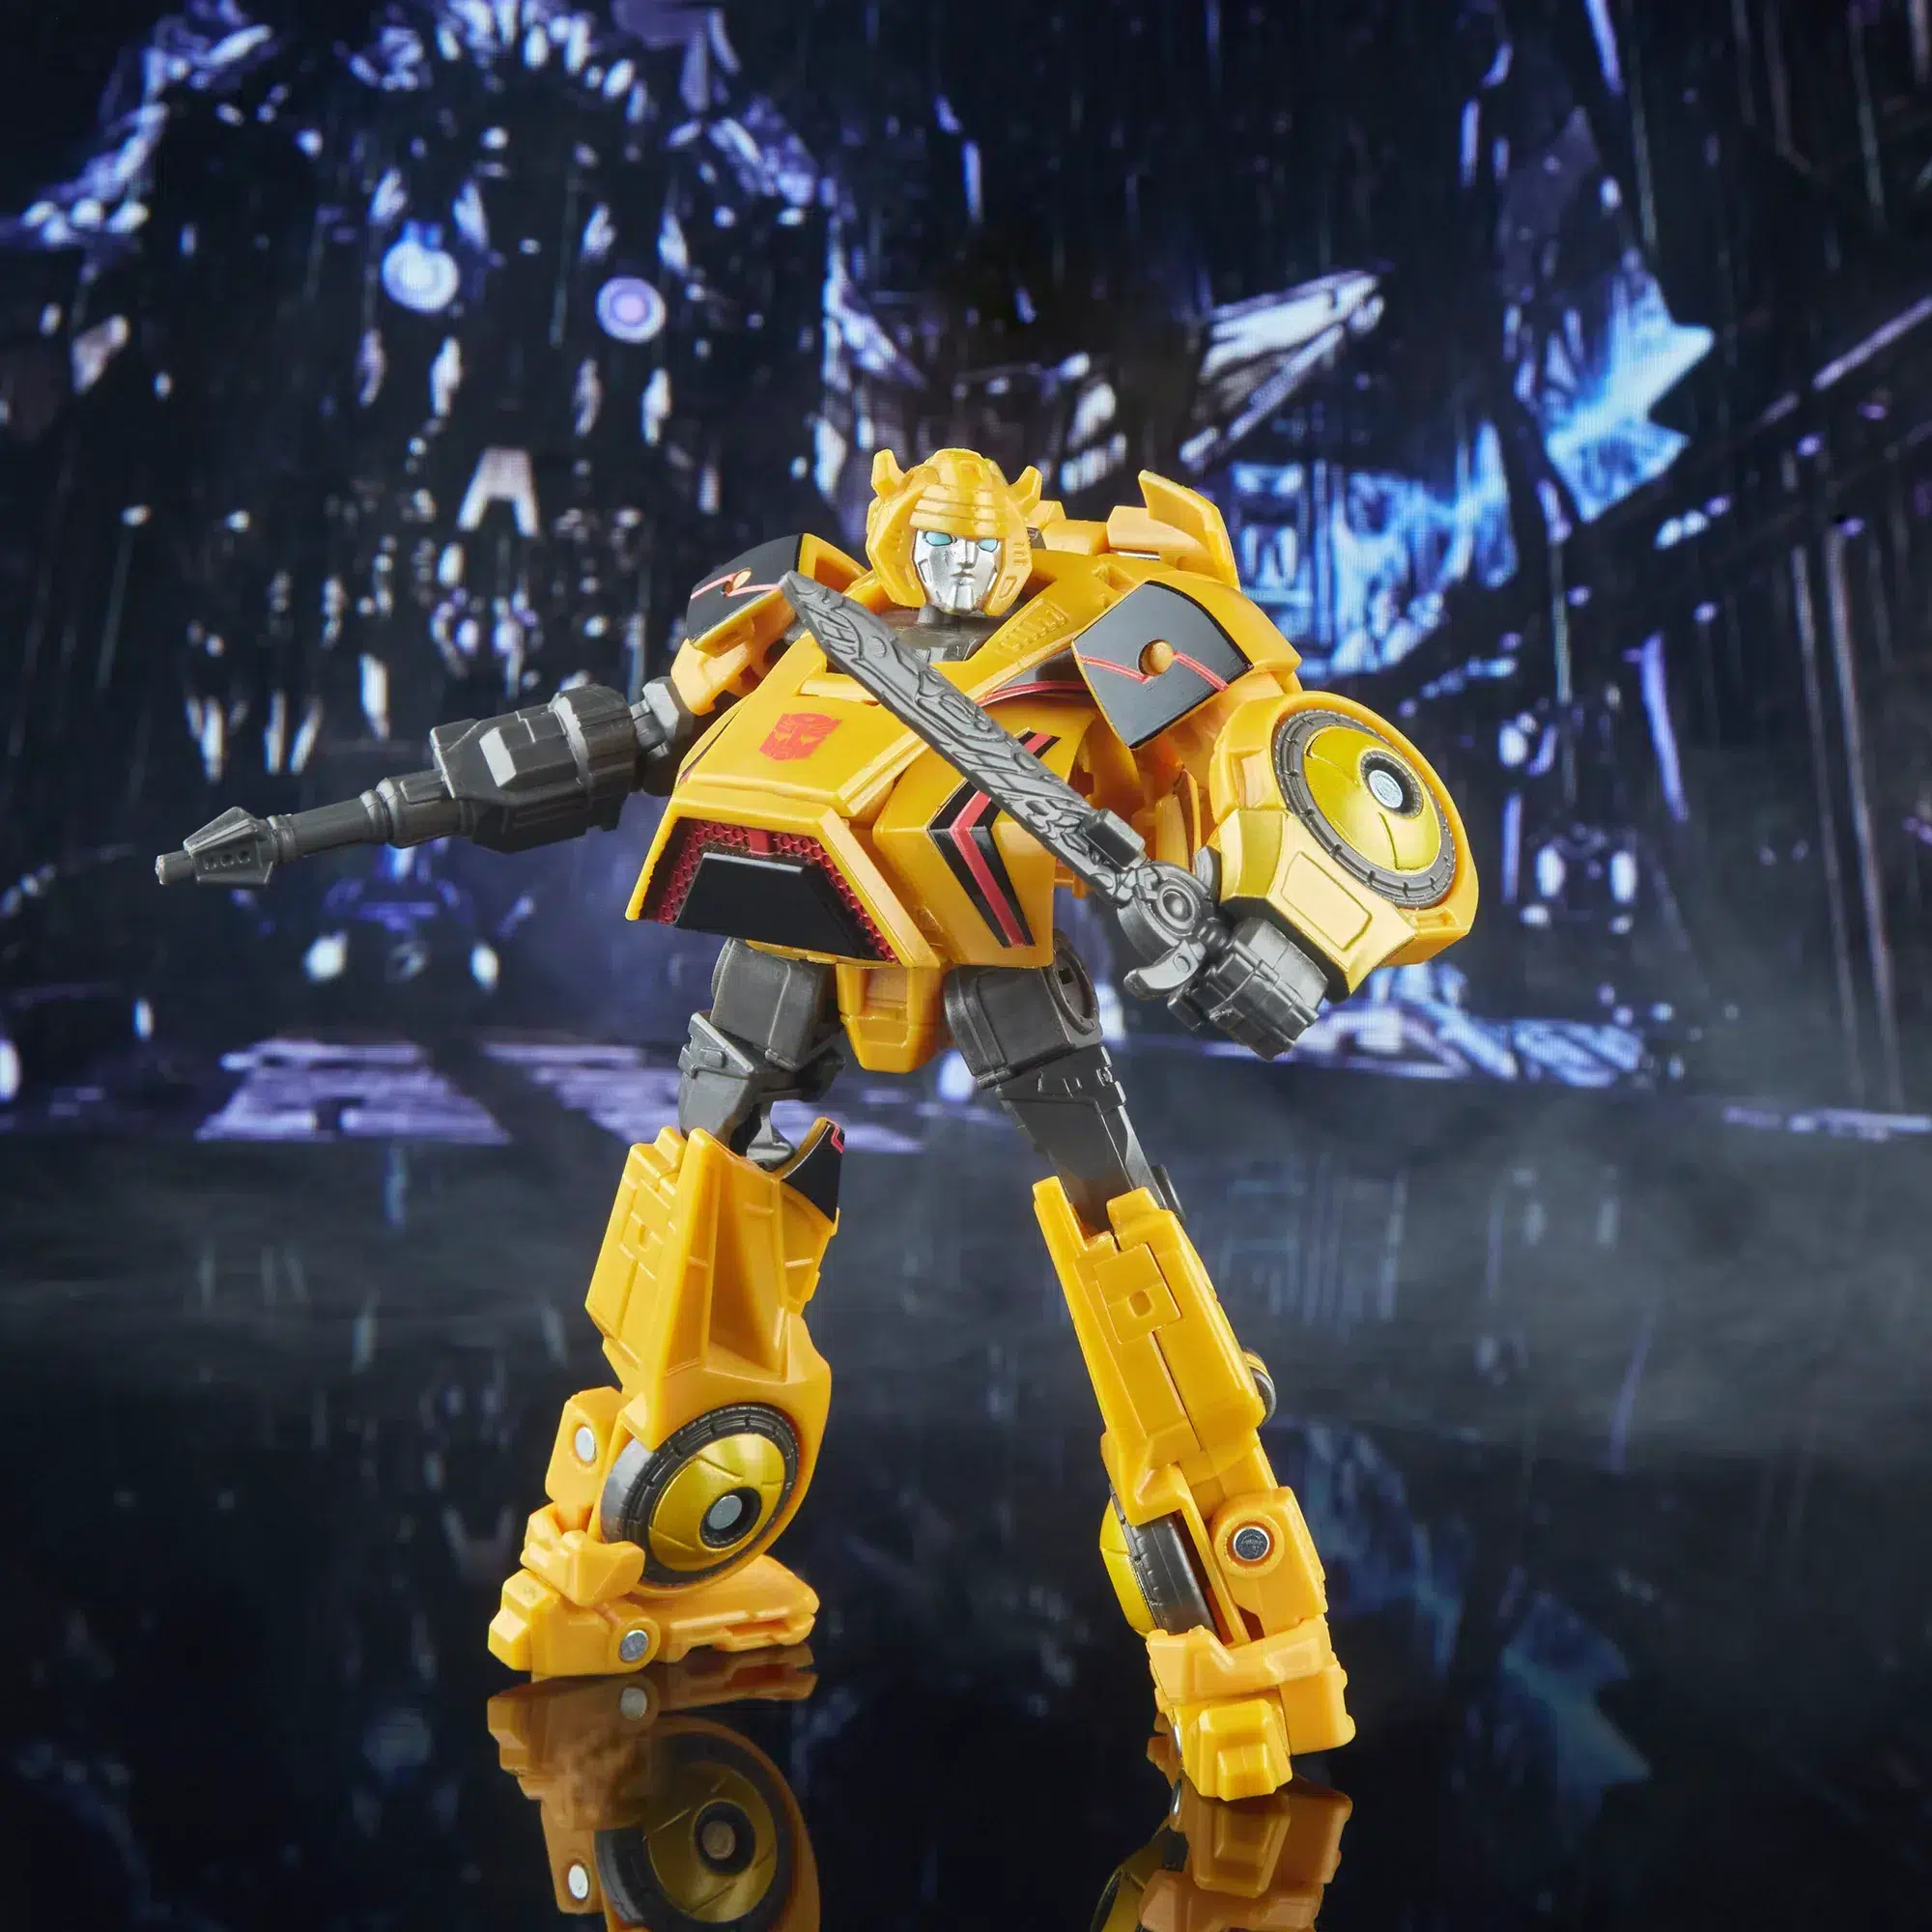 F7235_DIO_TRA_SS_GAMEREDITION_BUMBLEBEE_0002_2000_2000x